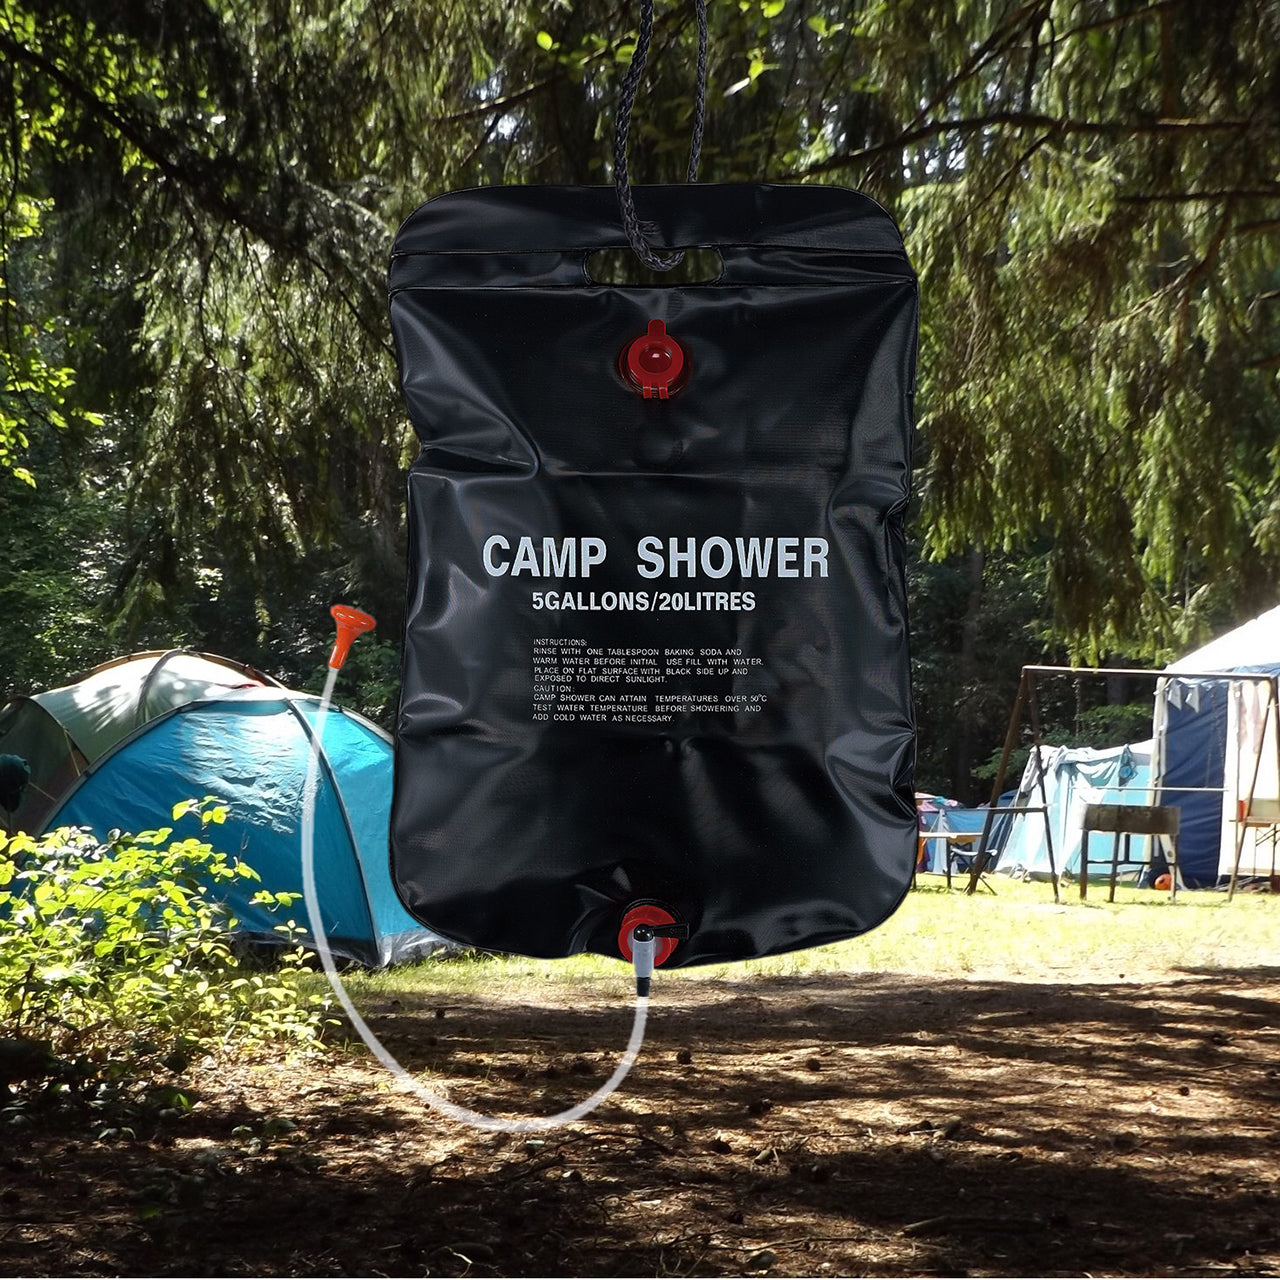 TrailGear 5 gallon Solar Shower Bag with Flexible Hose outside with a campsite in the background.